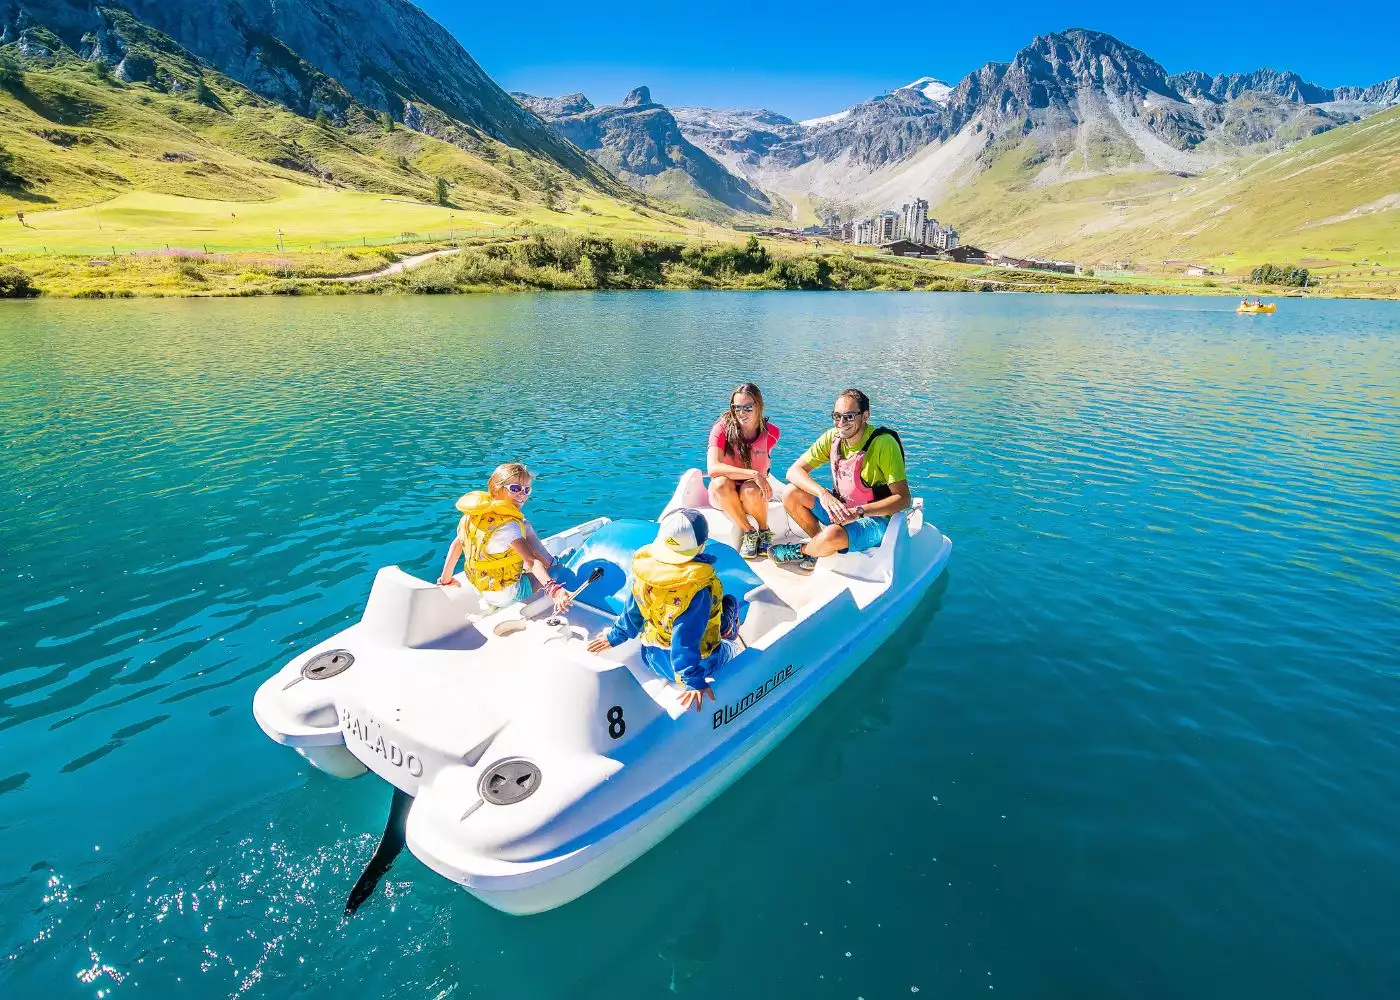 WATER ACTIVITIES ON THE LAKE OF TIGNES